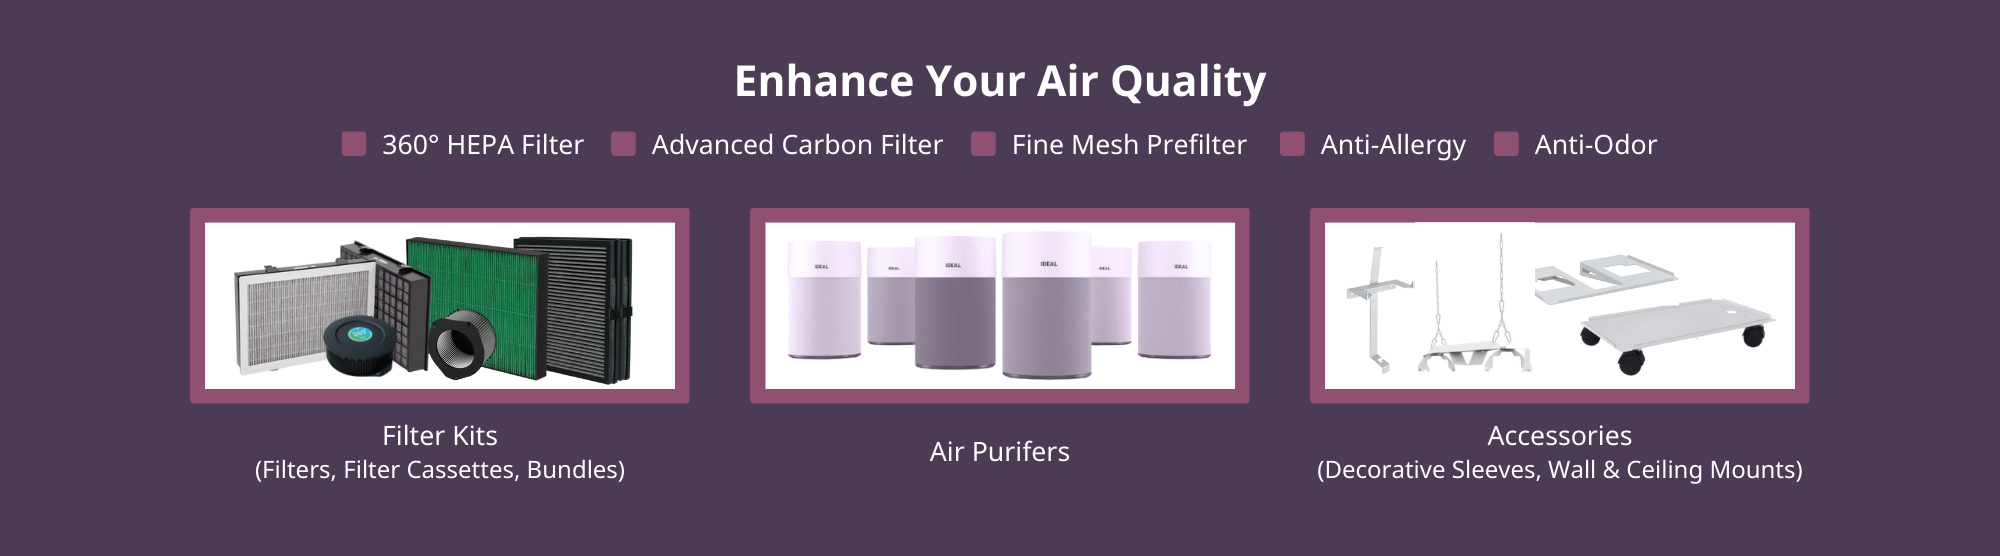 MBM-Ideal-Air-Purifiers-Collection-USA